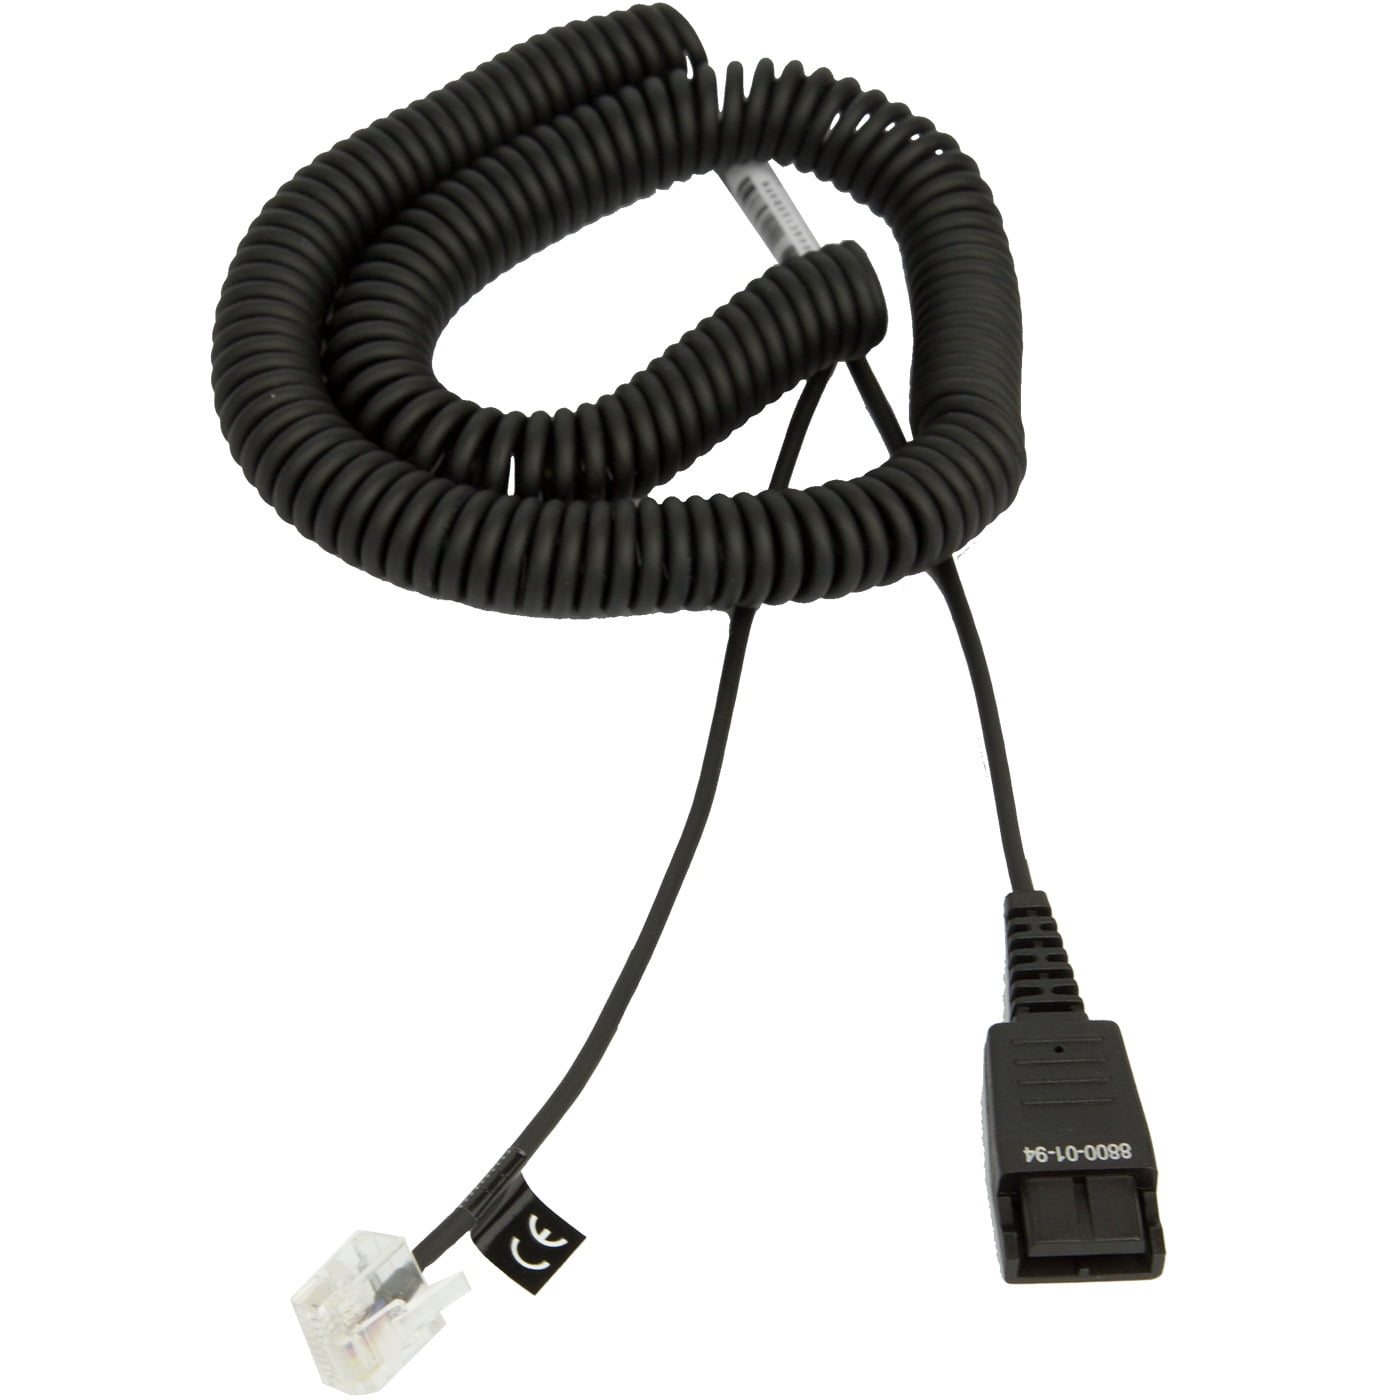 JABRA QUICK DISCONNECT TO MODULAR COILED BOTTOM CORD 2 METER 8800-01-37 NEW 